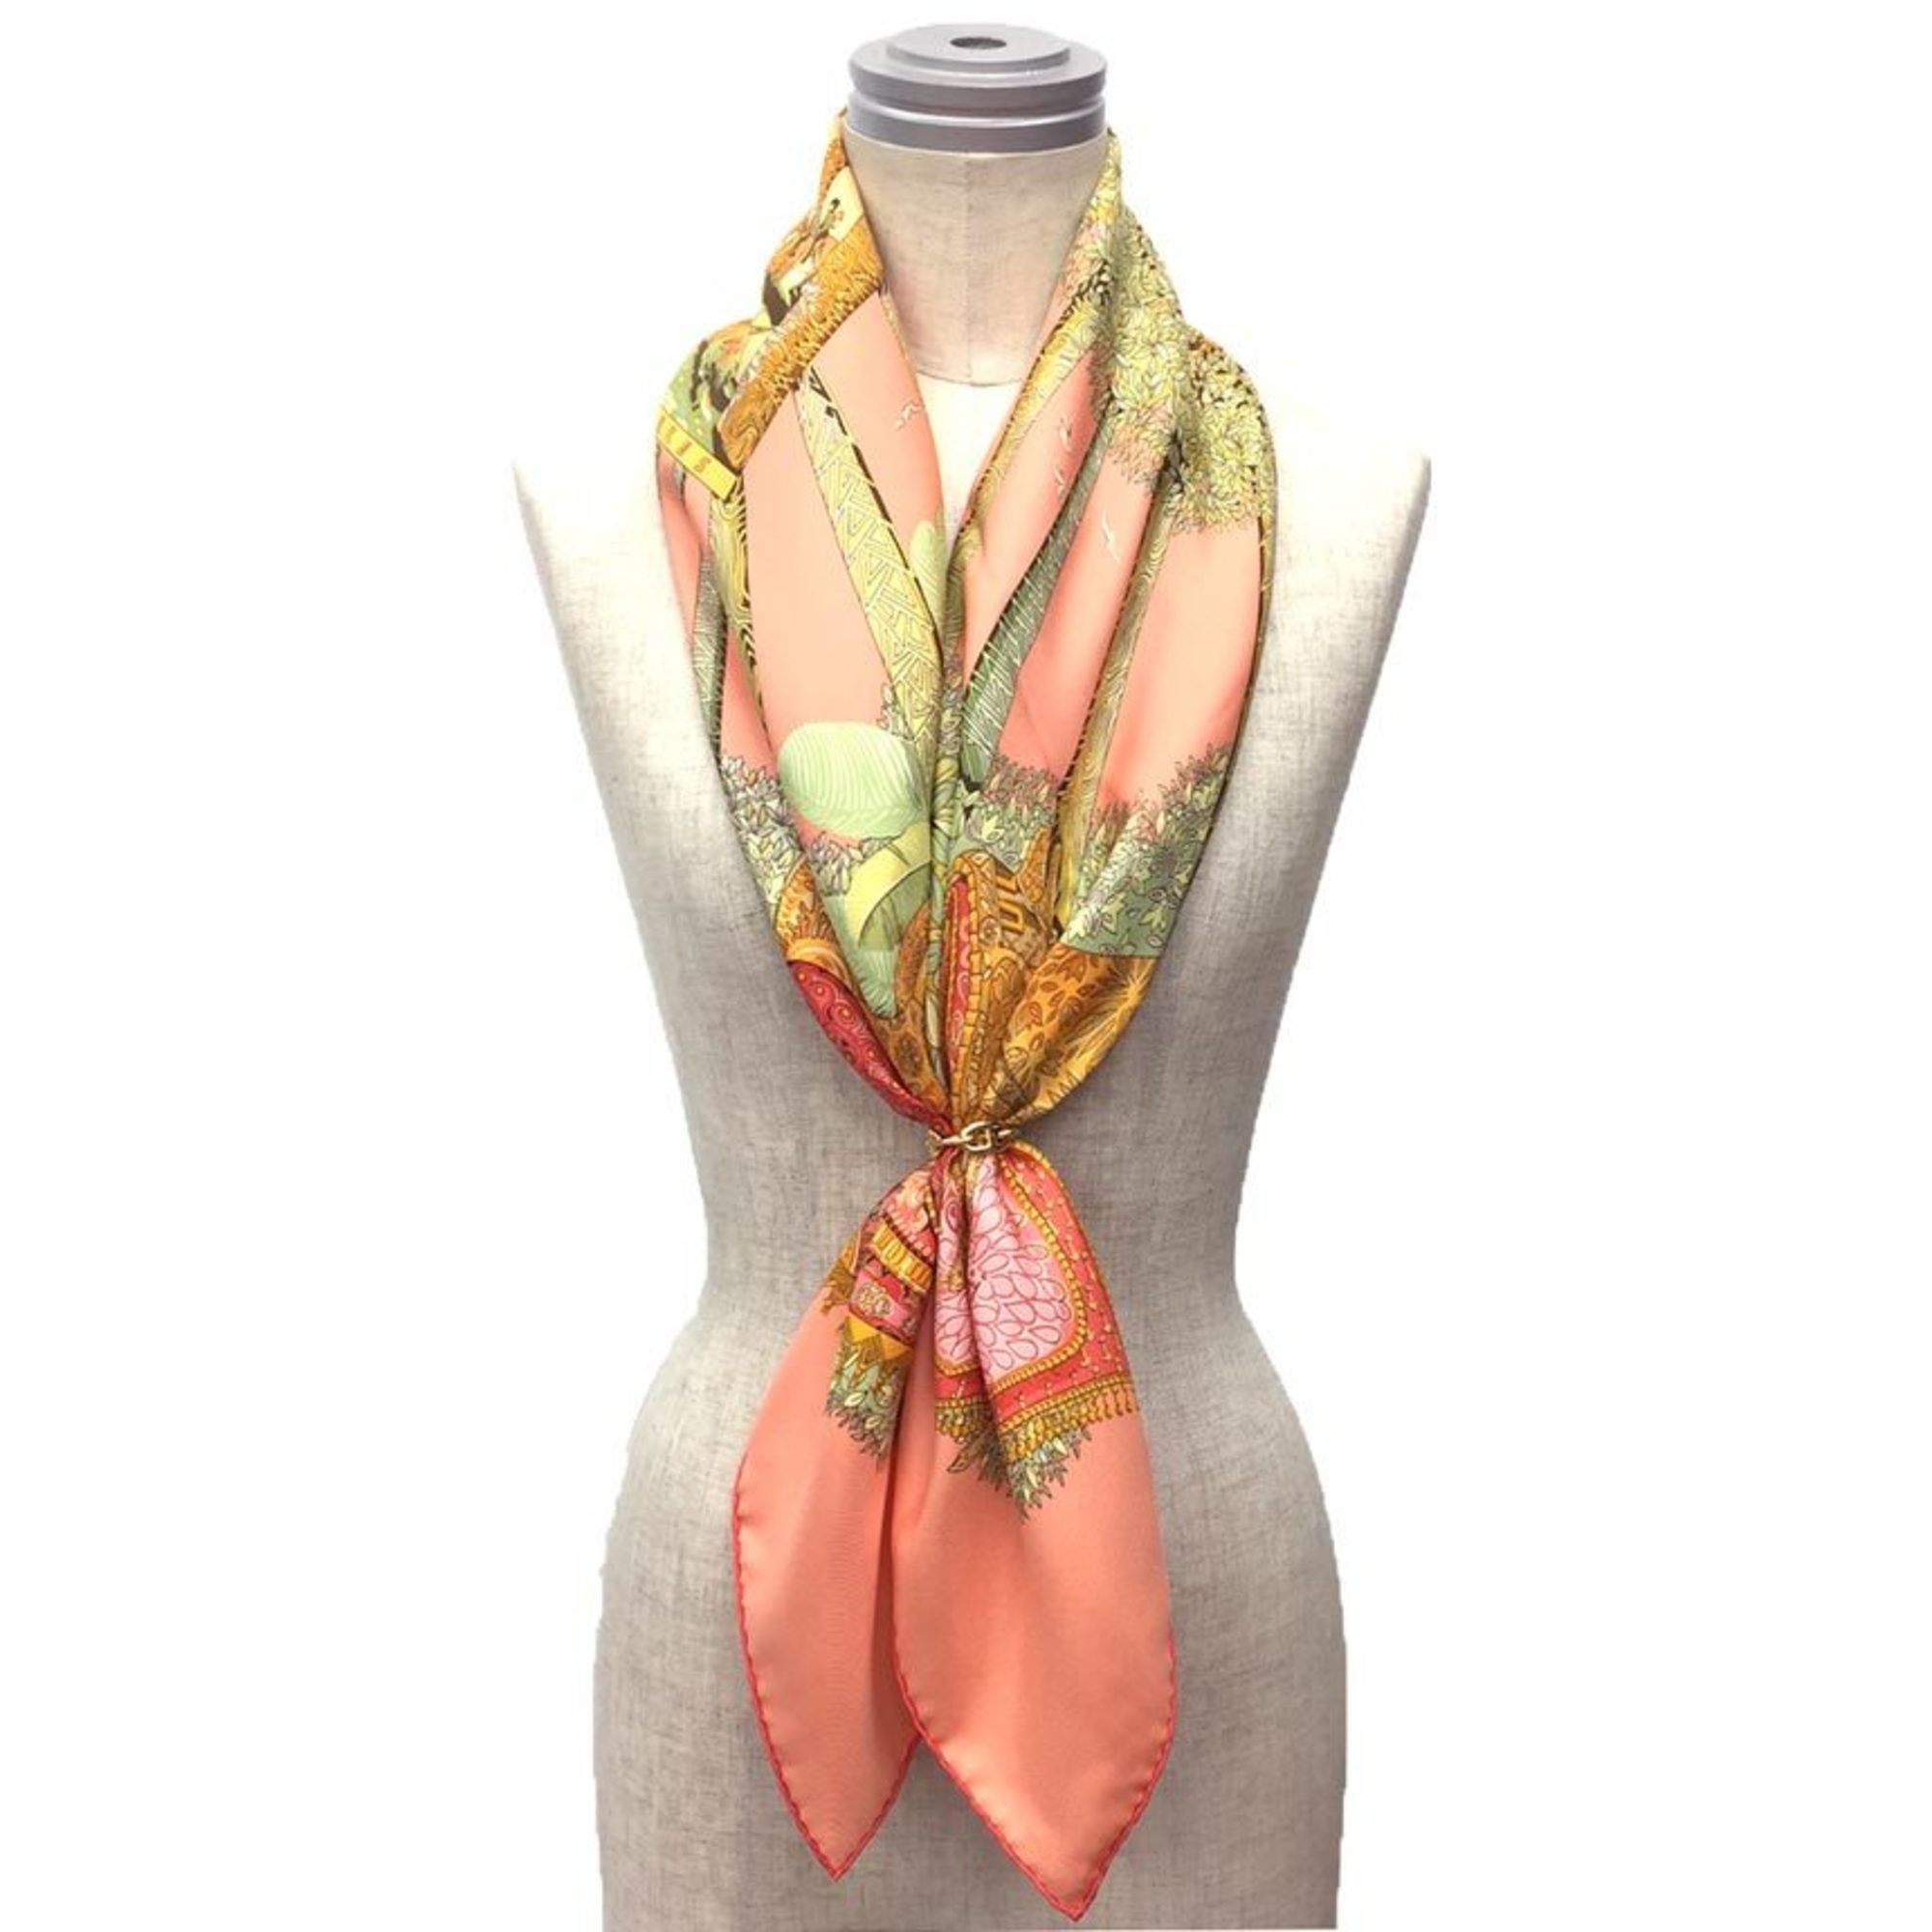 HERMES Scarf Muffler Carre 90 OMBRES ET LUMIERES Shadow and Light Coral Orange 100% Silk aq10112